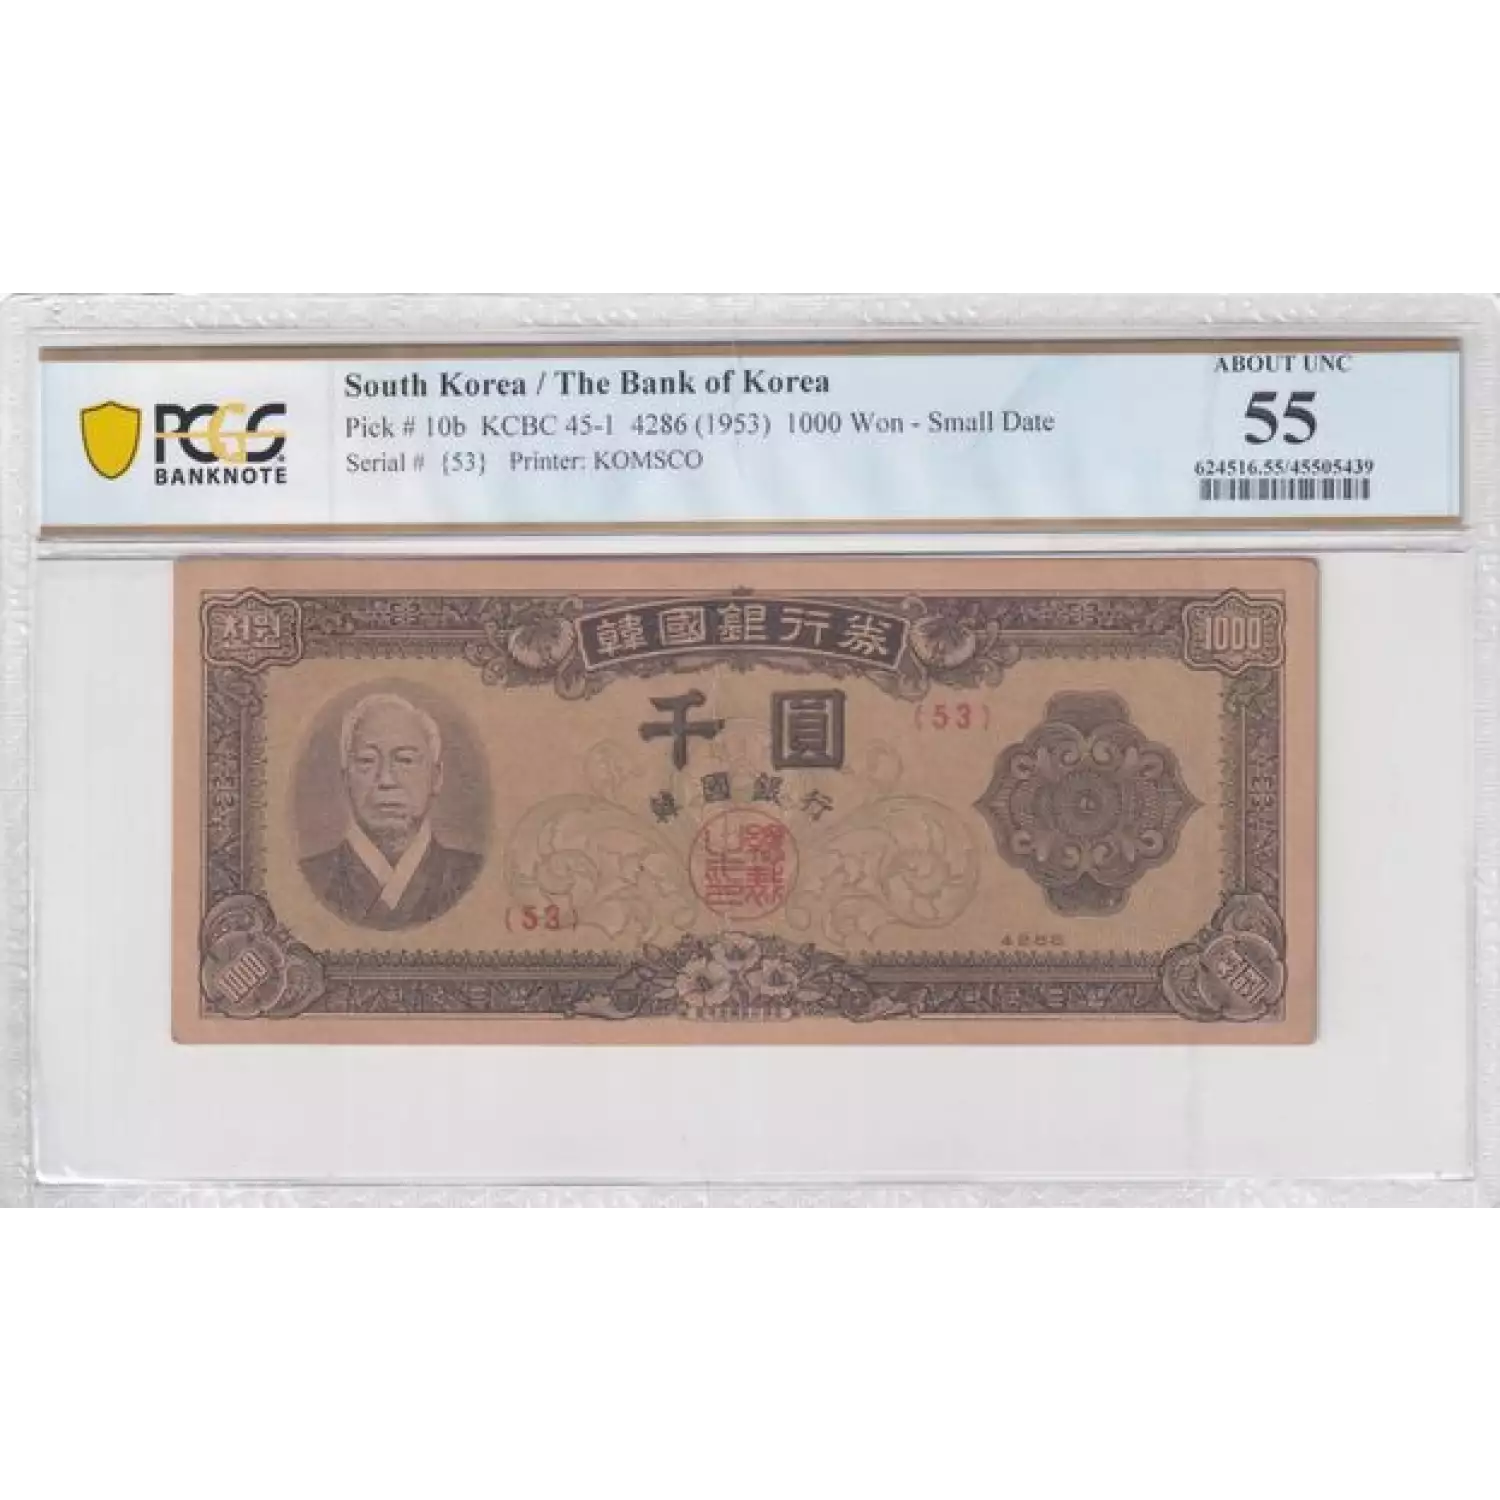 1000 Won 4285 (1952); 4286 (1953), 1952 Issue b. Small date. 4286 South Korea 10 (2)